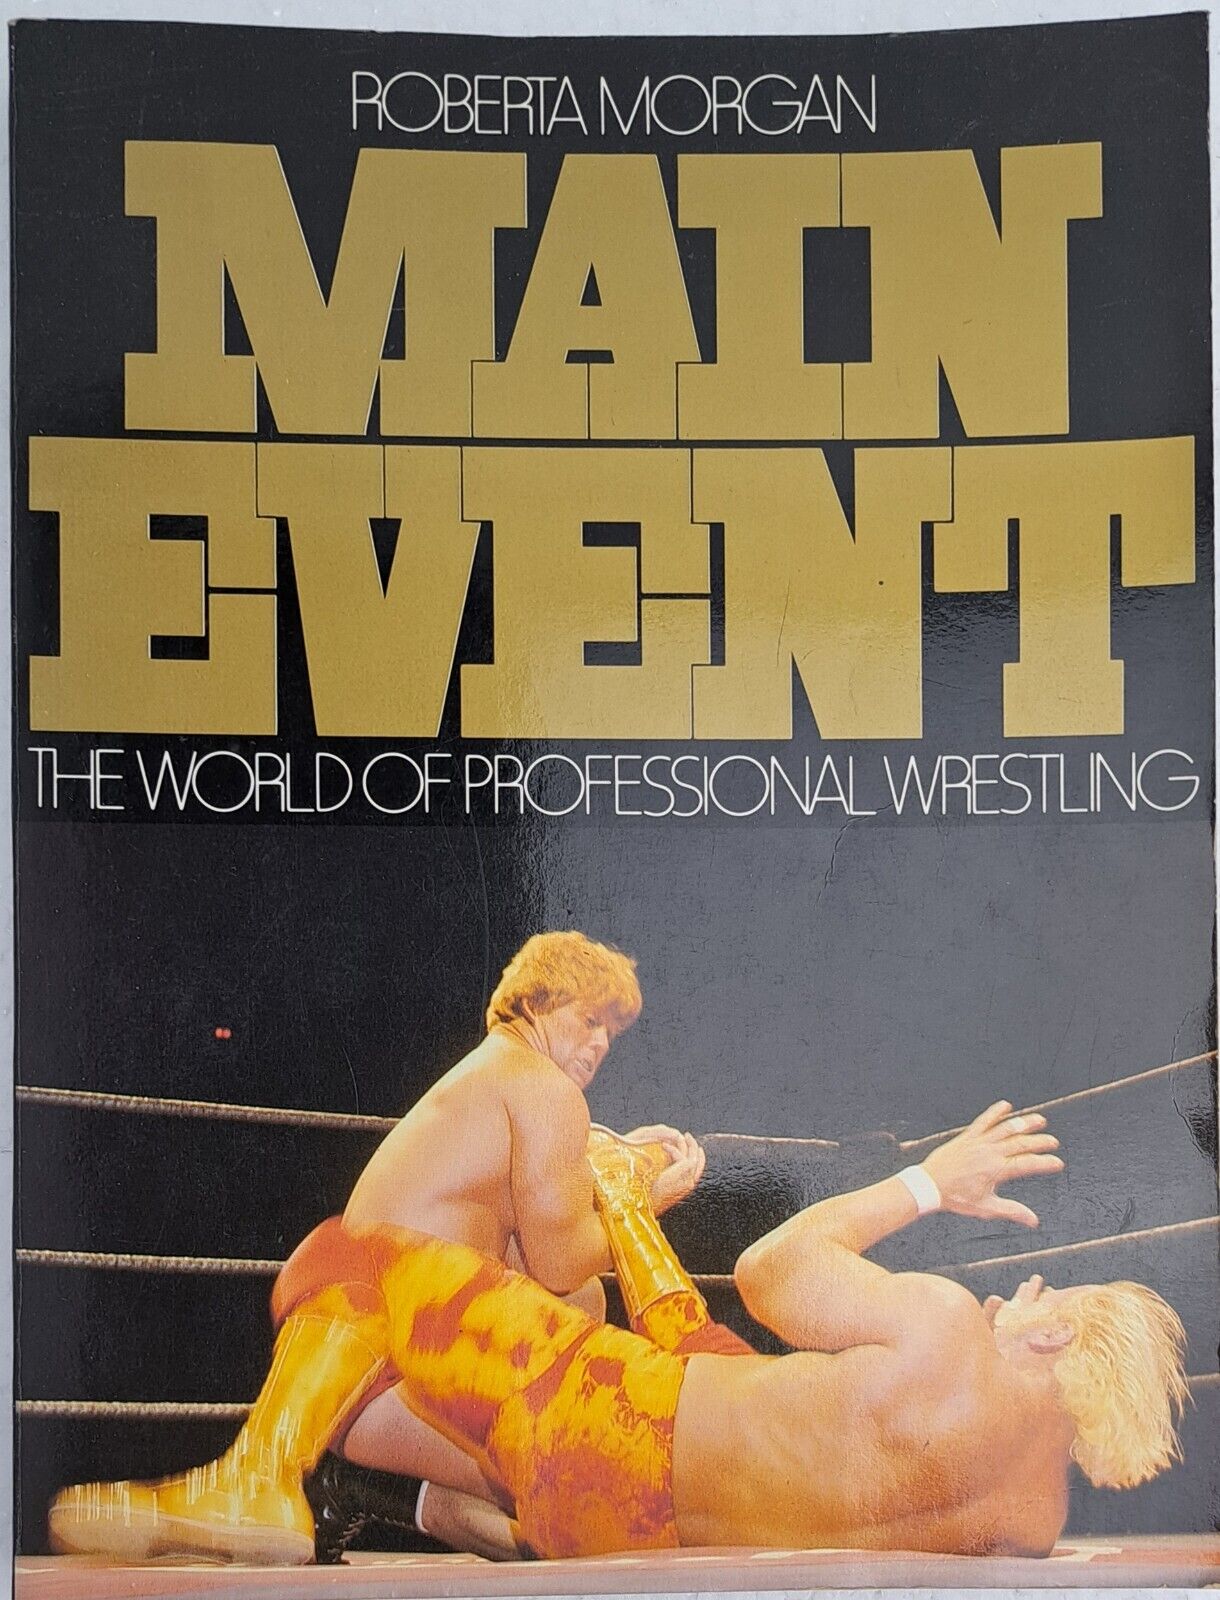 Main Event: The World of Professional Wrestling by Roberta Morgan 1979